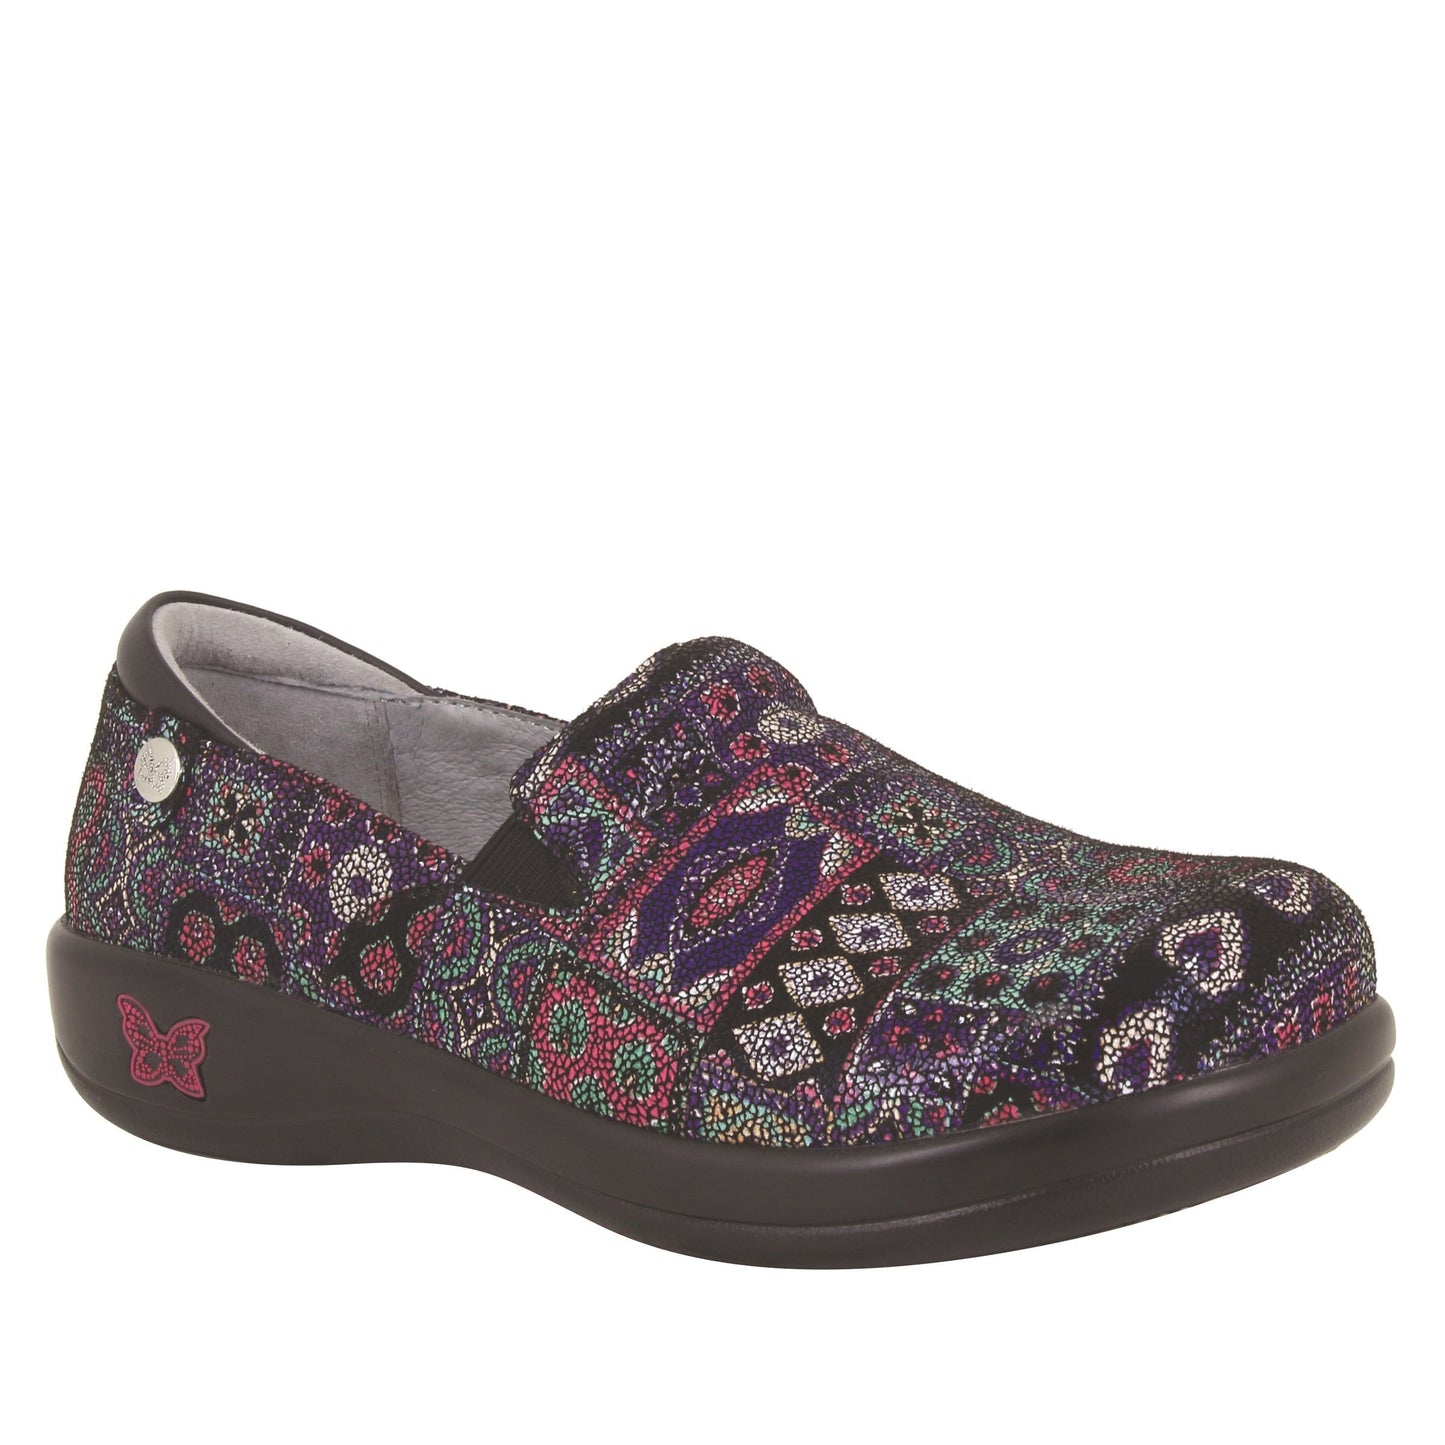 Alegria Sale Shoe Size 40 Keli Professional in Persian Rug at Parker's Clothing and Shoes.